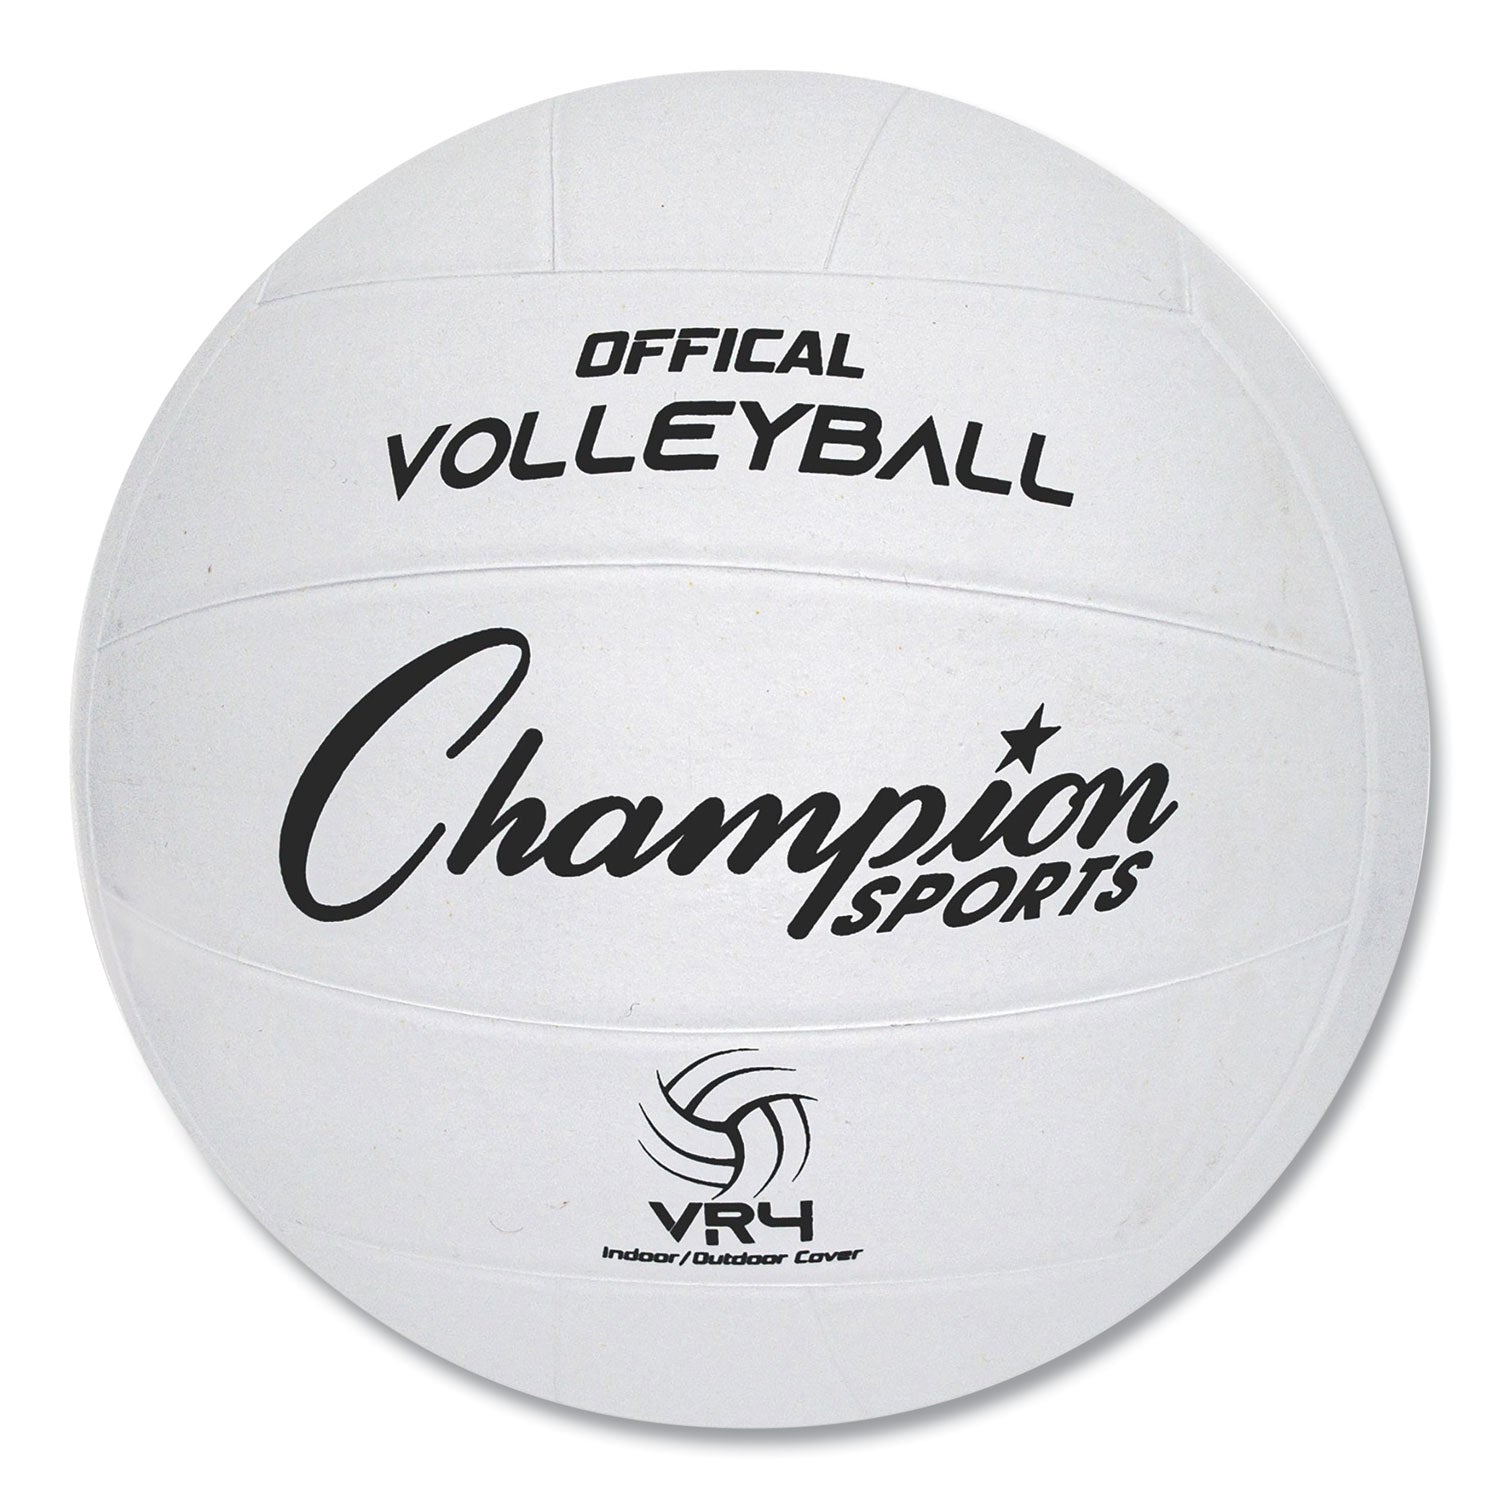 Rubber Sports Ball, For Volleyball, Official Size, White - 